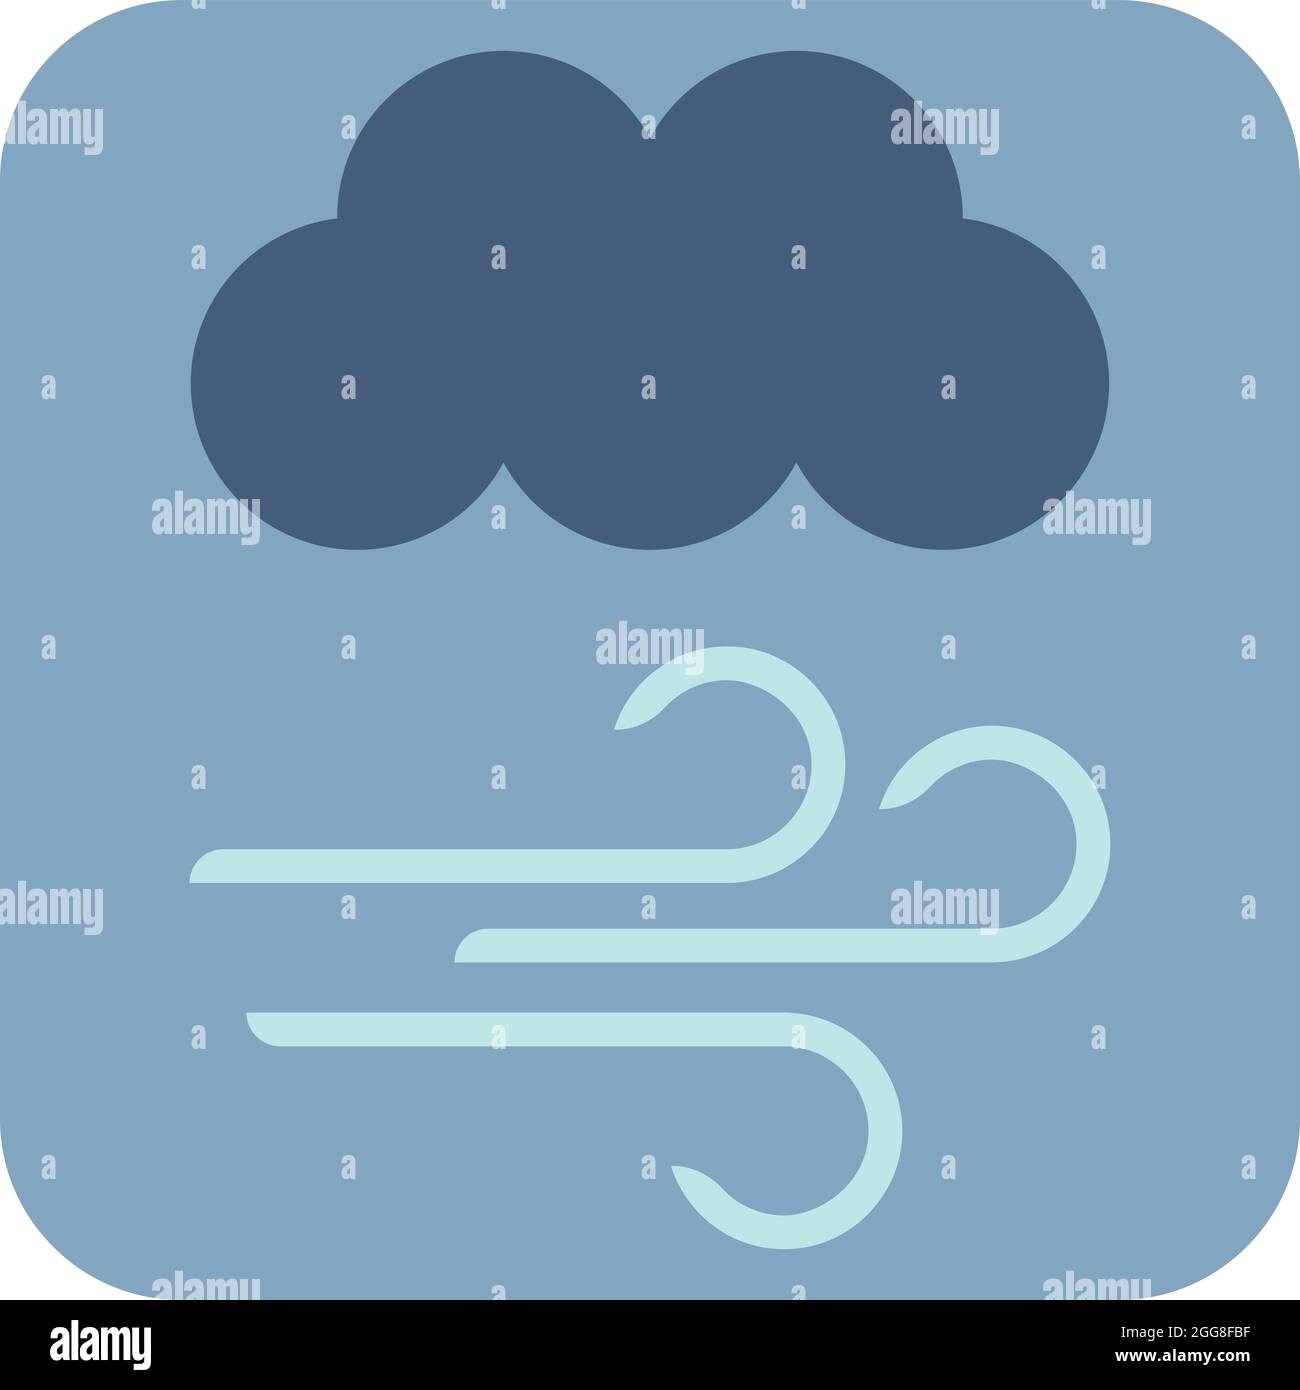 Windy cloud cartoon Cut Out Stock Images & Pictures - Alamy